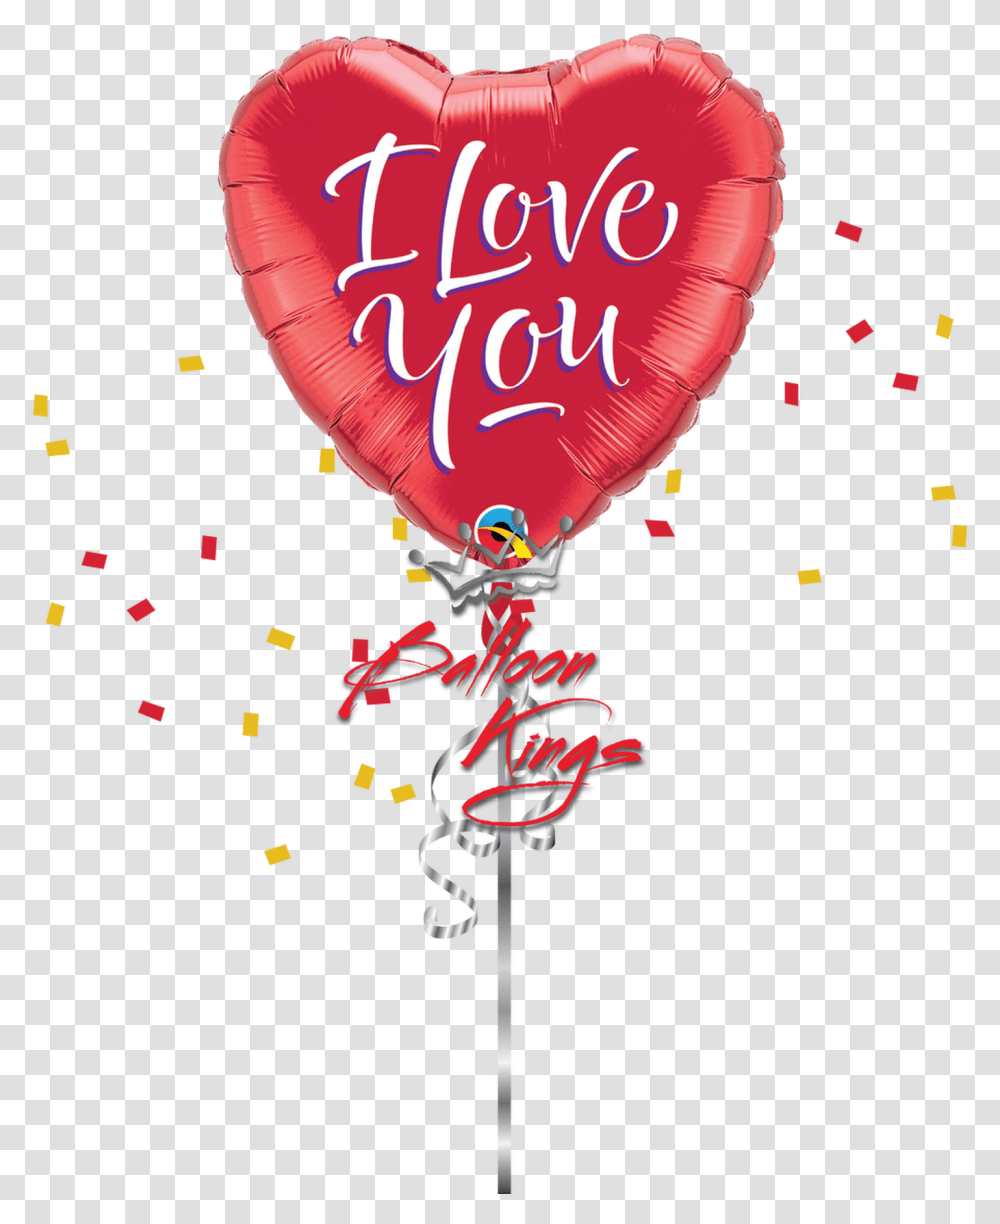 I Love You Heart Red Balloon I Love You Transparent Png